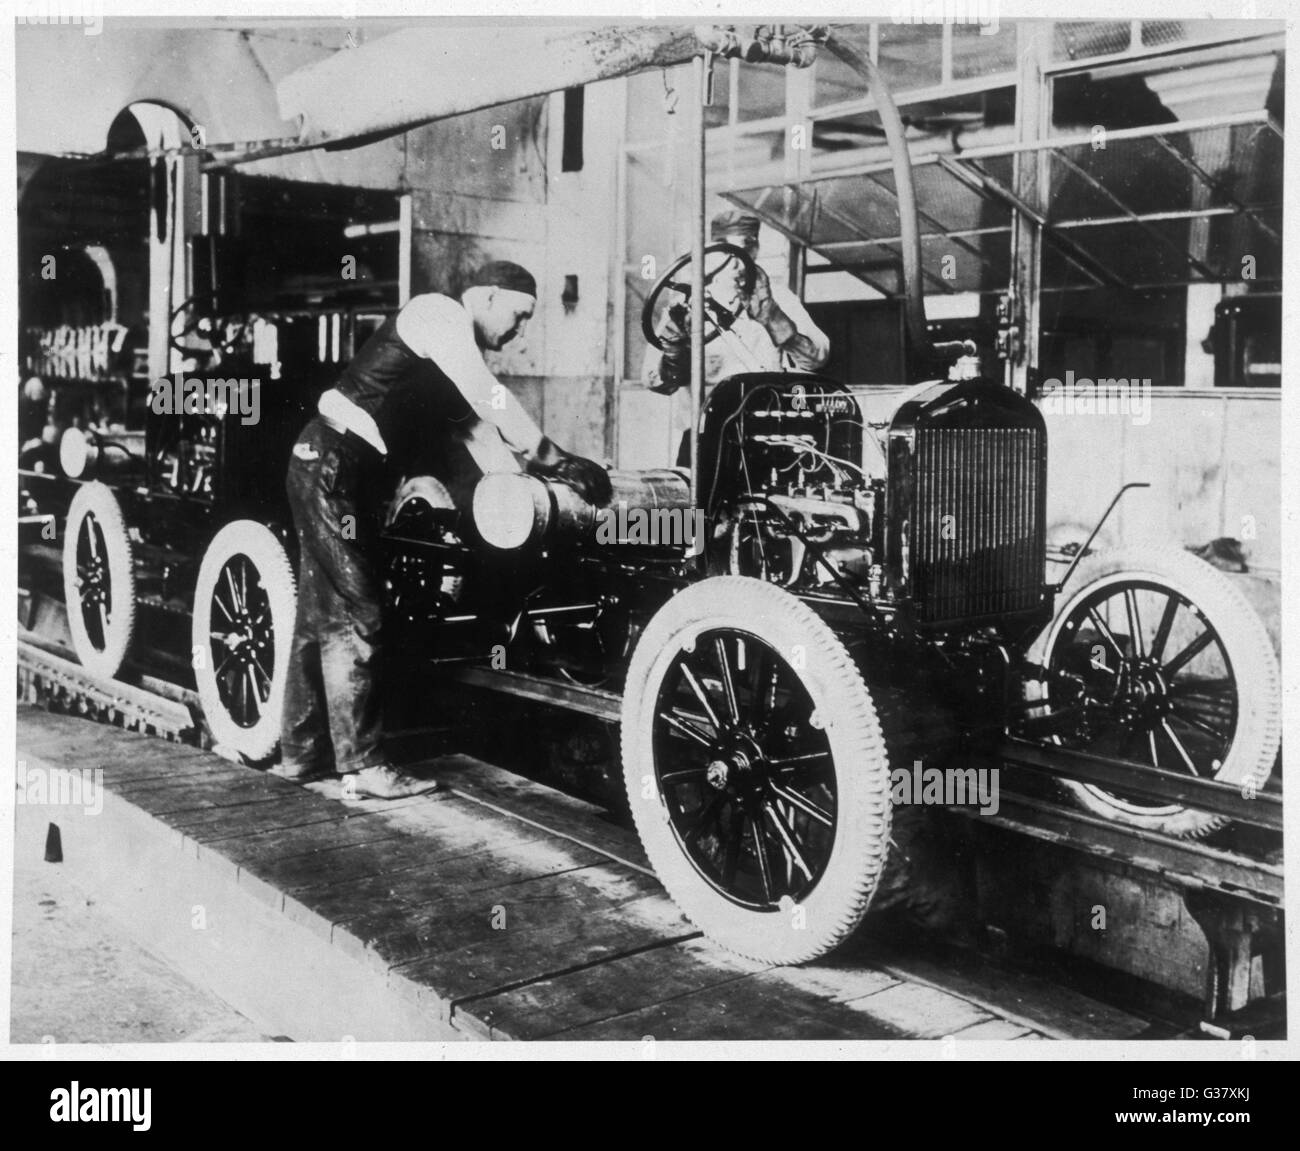 Working on the Ford assembly line in Detroit, USA, 1913.     Date: 1913 Stock Photo